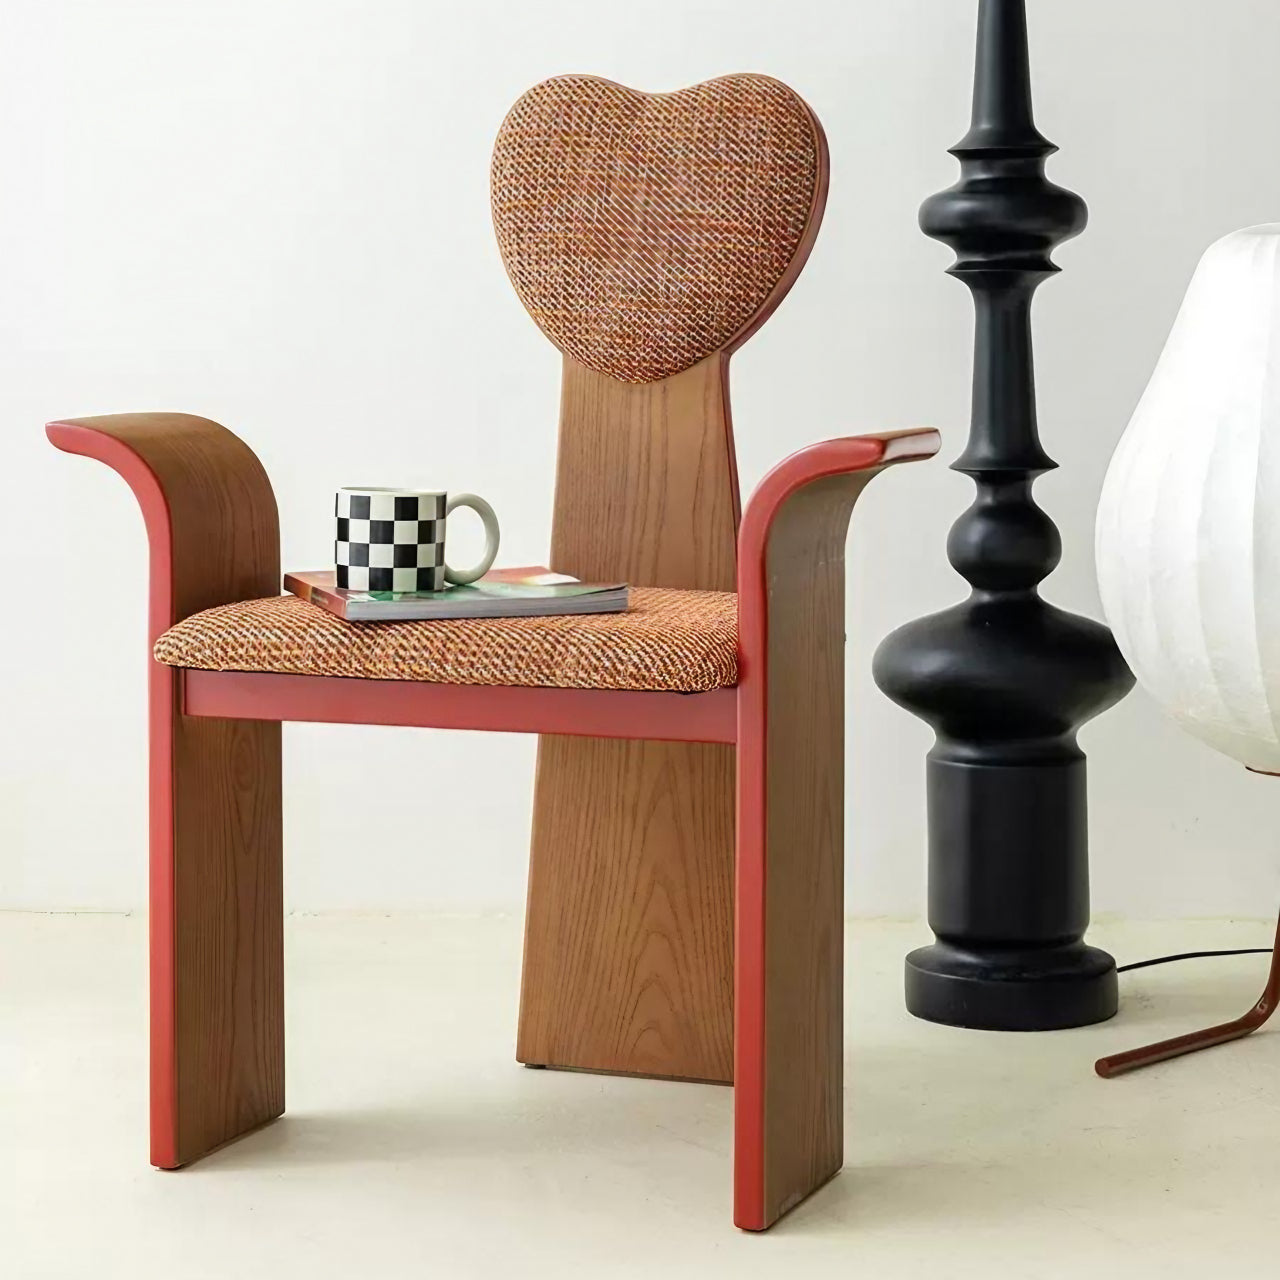 Light Brown Heart-Shaped Dining Chair with Creative Design